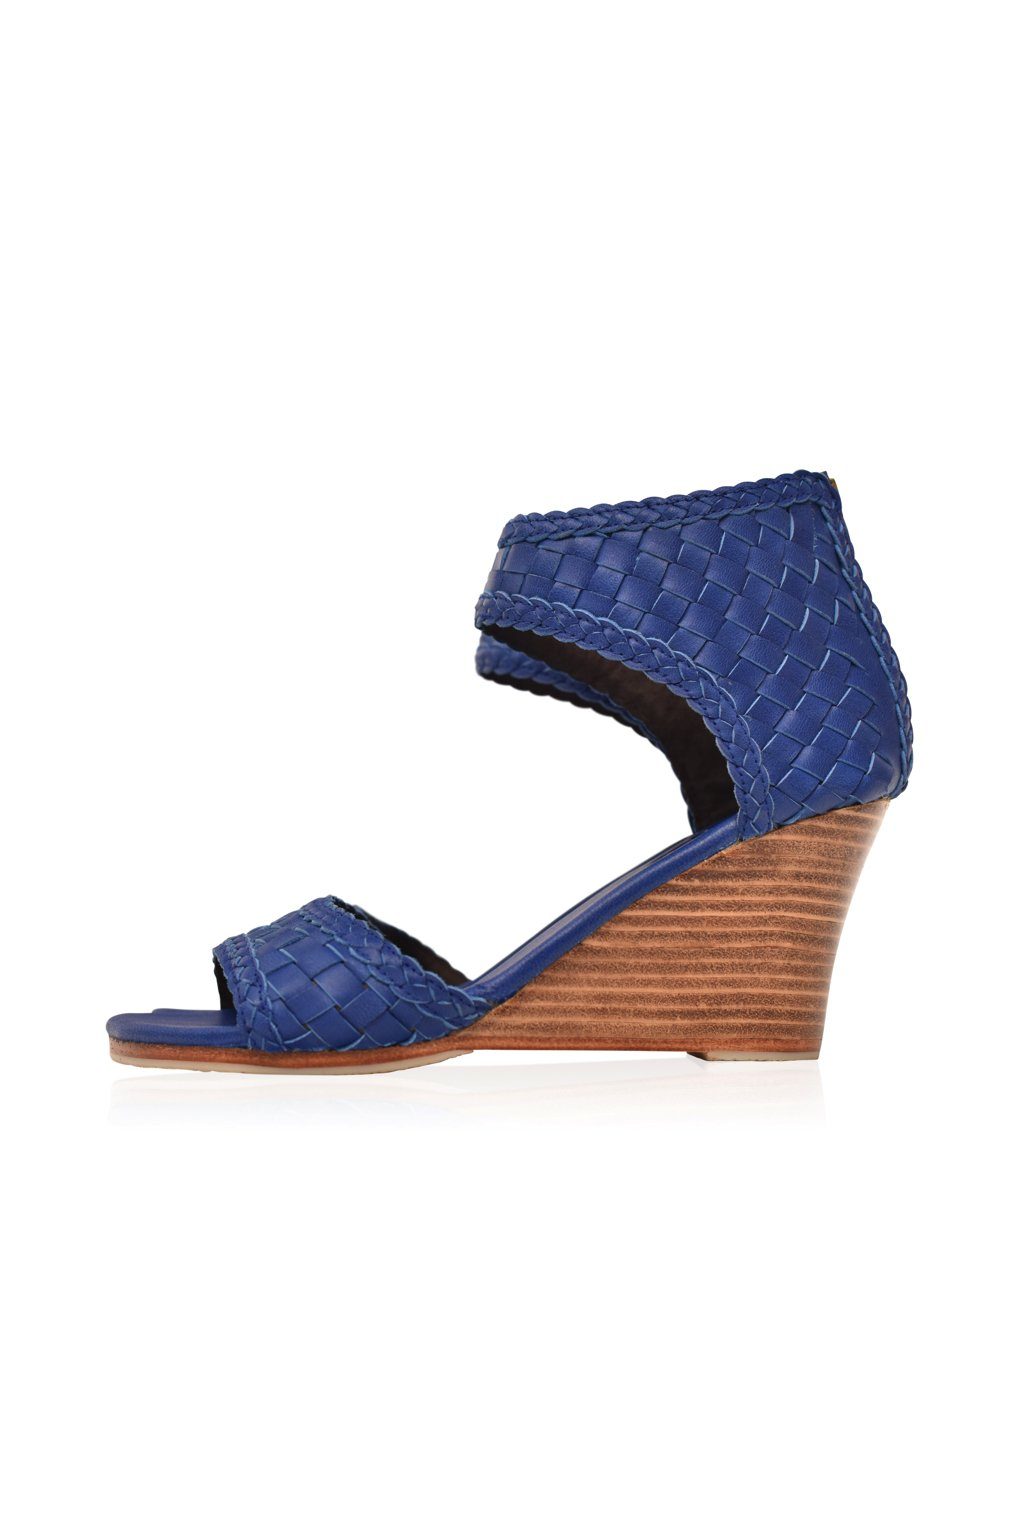 royal blue wedge shoes